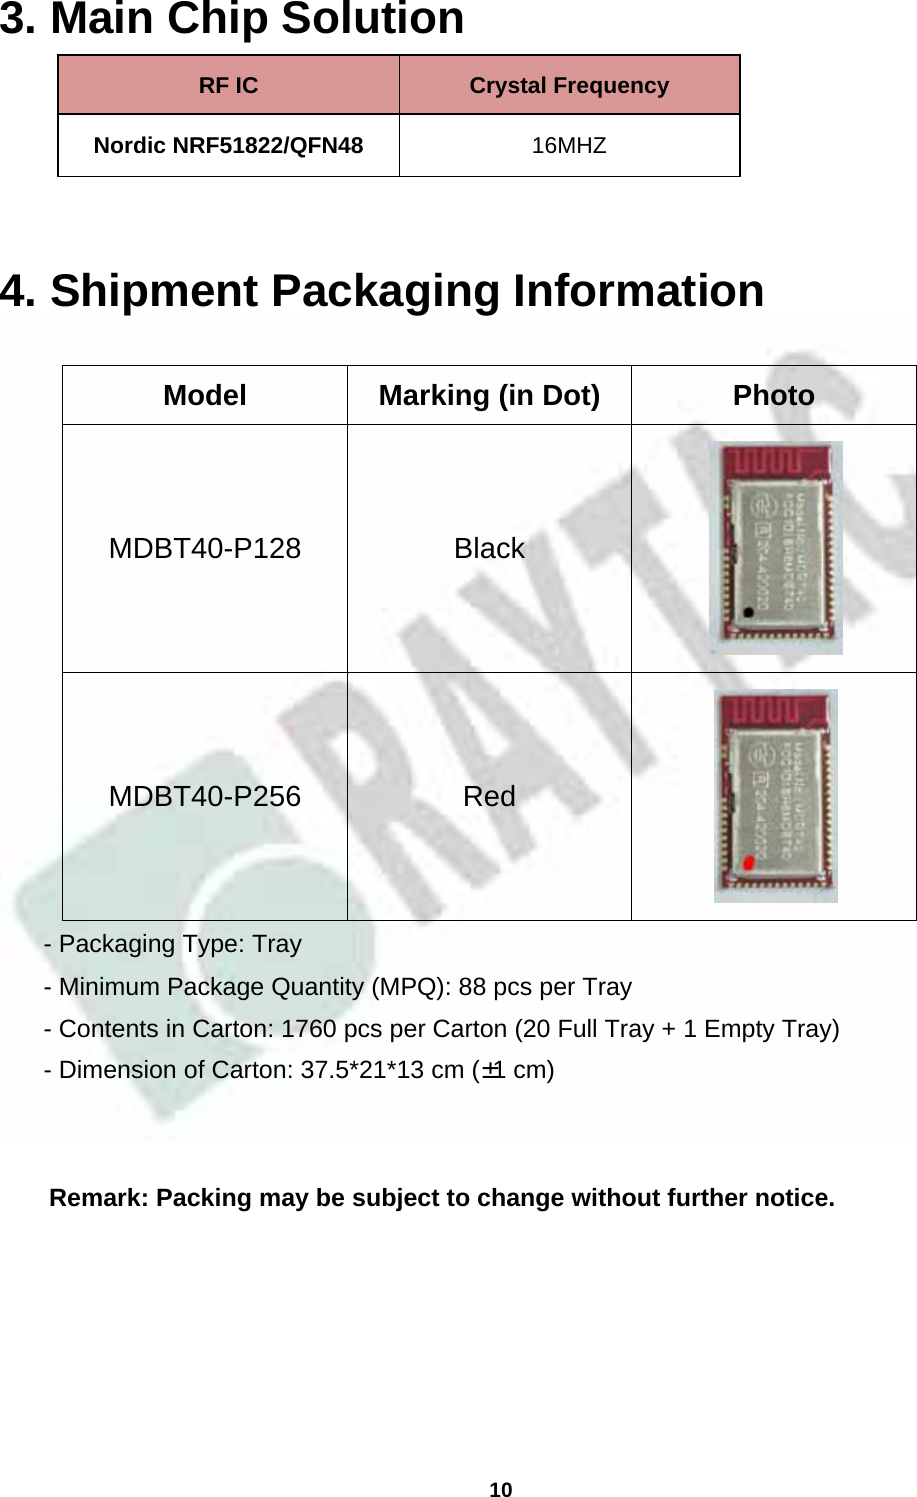  10  3. Main Chip Solution RF IC  Crystal Frequency Nordic NRF51822/QFN48  16MHZ 4. Shipment Packaging InformationModel  Marking (in Dot)  Photo MDBT40-P128 Black  MDBT40-P256 Red    - Packaging Type: Tray  - Minimum Package Quantity (MPQ): 88 pcs per Tray  - Contents in Carton: 1760 pcs per Carton (20 Full Tray + 1 Empty Tray)  - Dimension of Carton: 37.5*21*13 cm (±1 cm)Remark: Packing may be subject to change without further notice.     